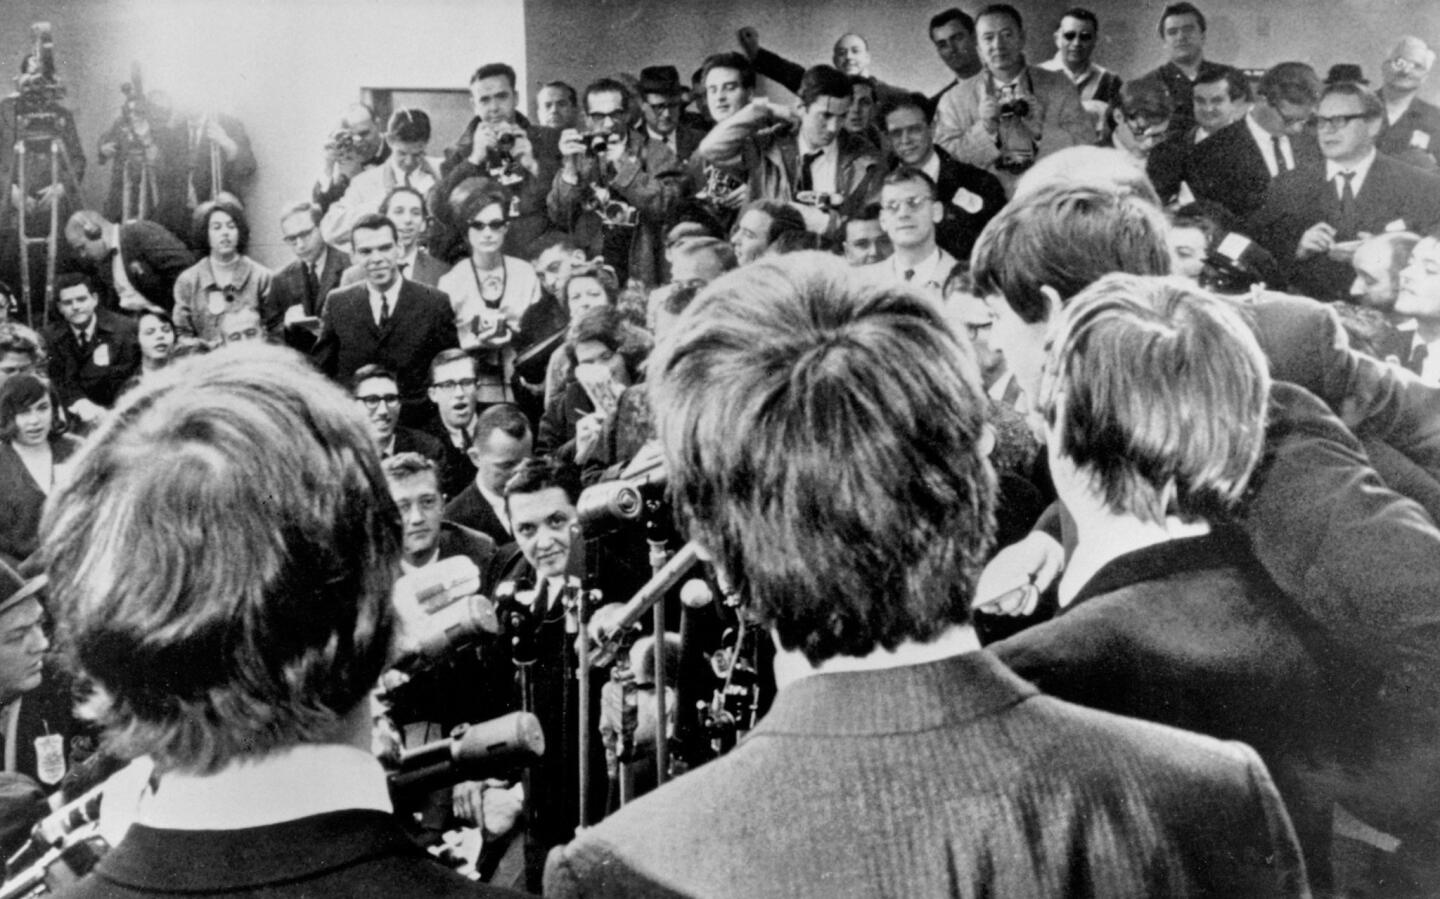 The Beatles face the media at Idlewile Airport (now JFK) in New York on Feb. 7, 1964, after a welcoming by a screaming crowd estimated at 5,000 people.